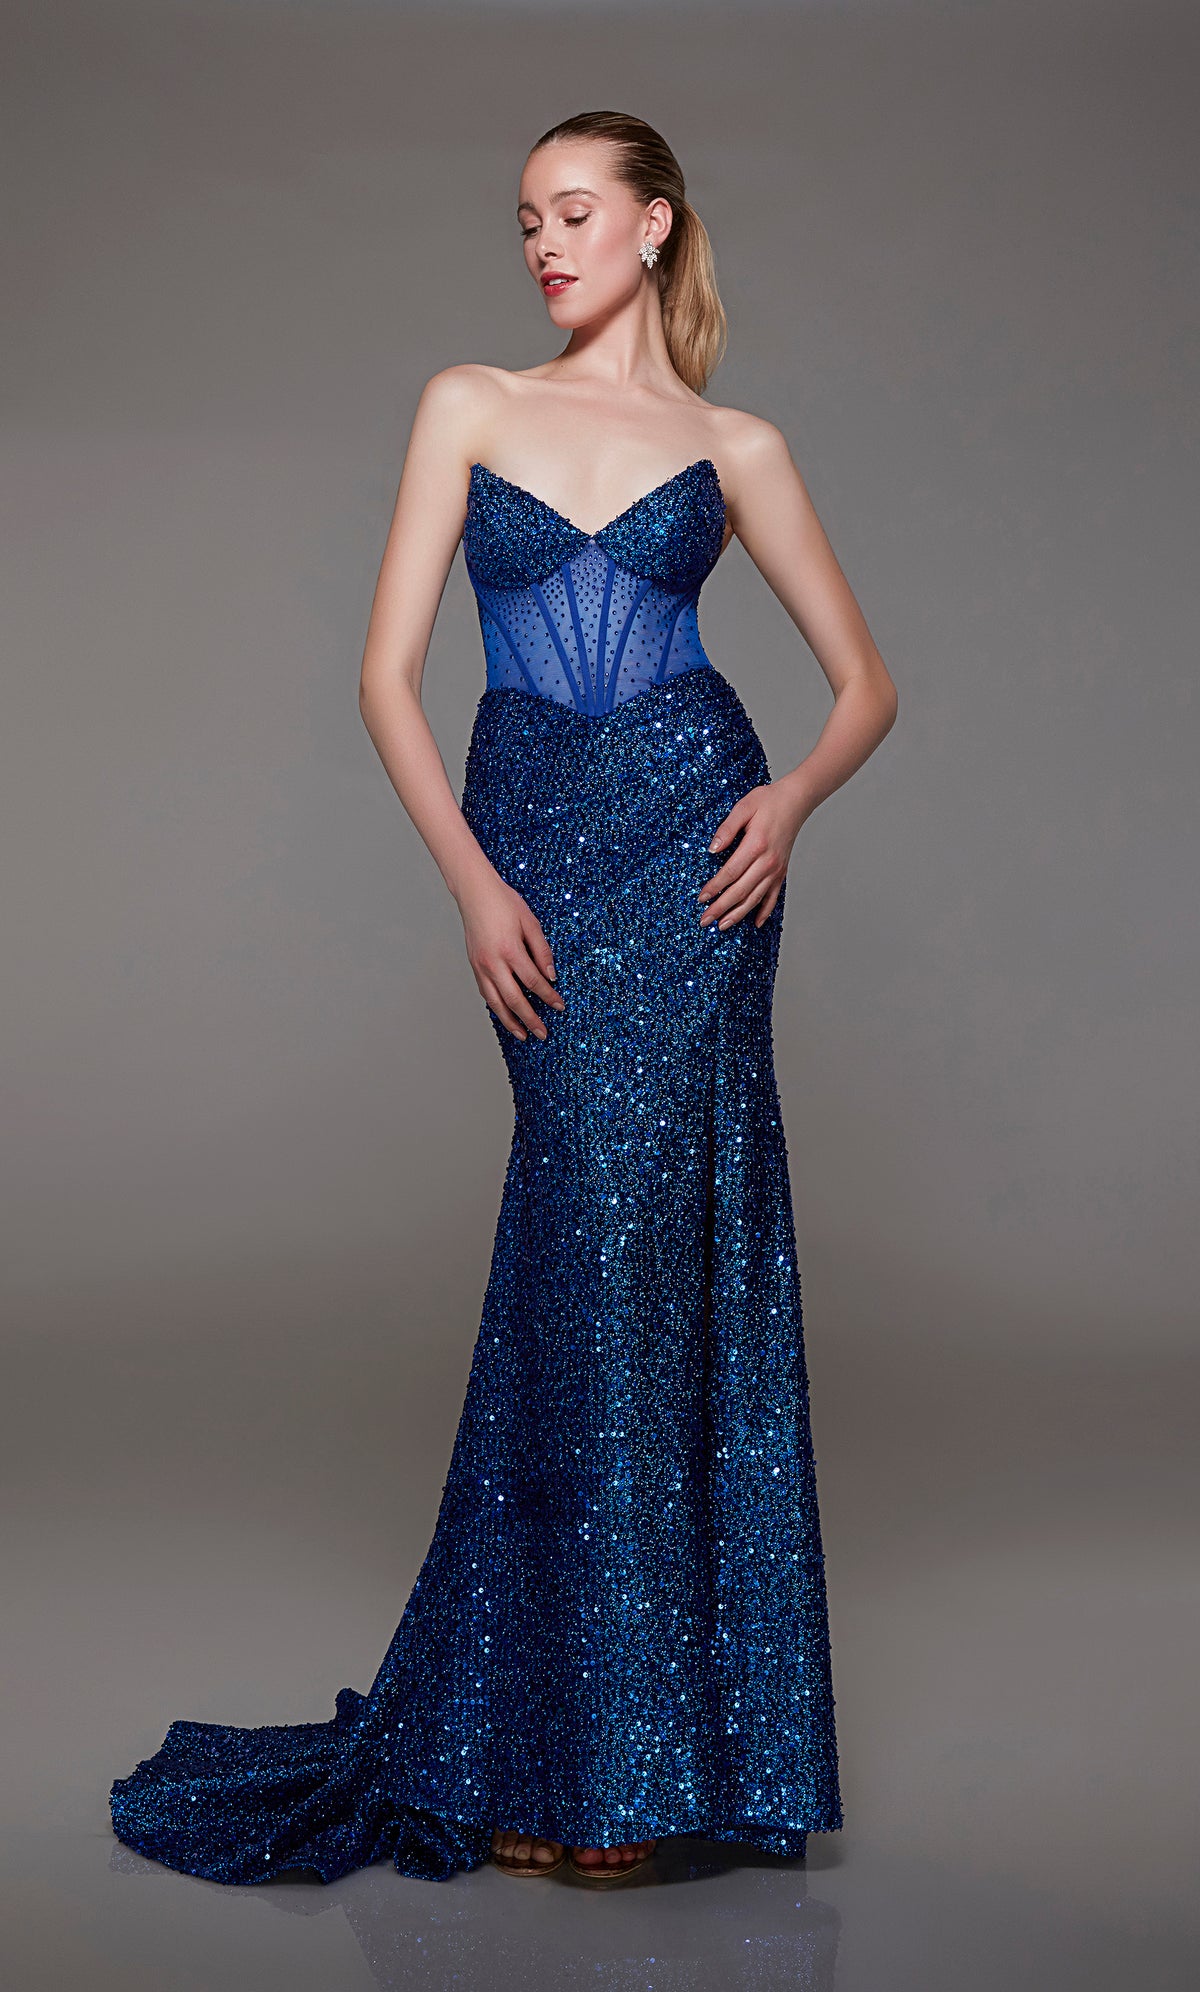 Captivating royal blue strapless prom dress with intricate sequin detailing, corset bodice, alluring slit, and an graceful train for an red-carpet-worthy look.